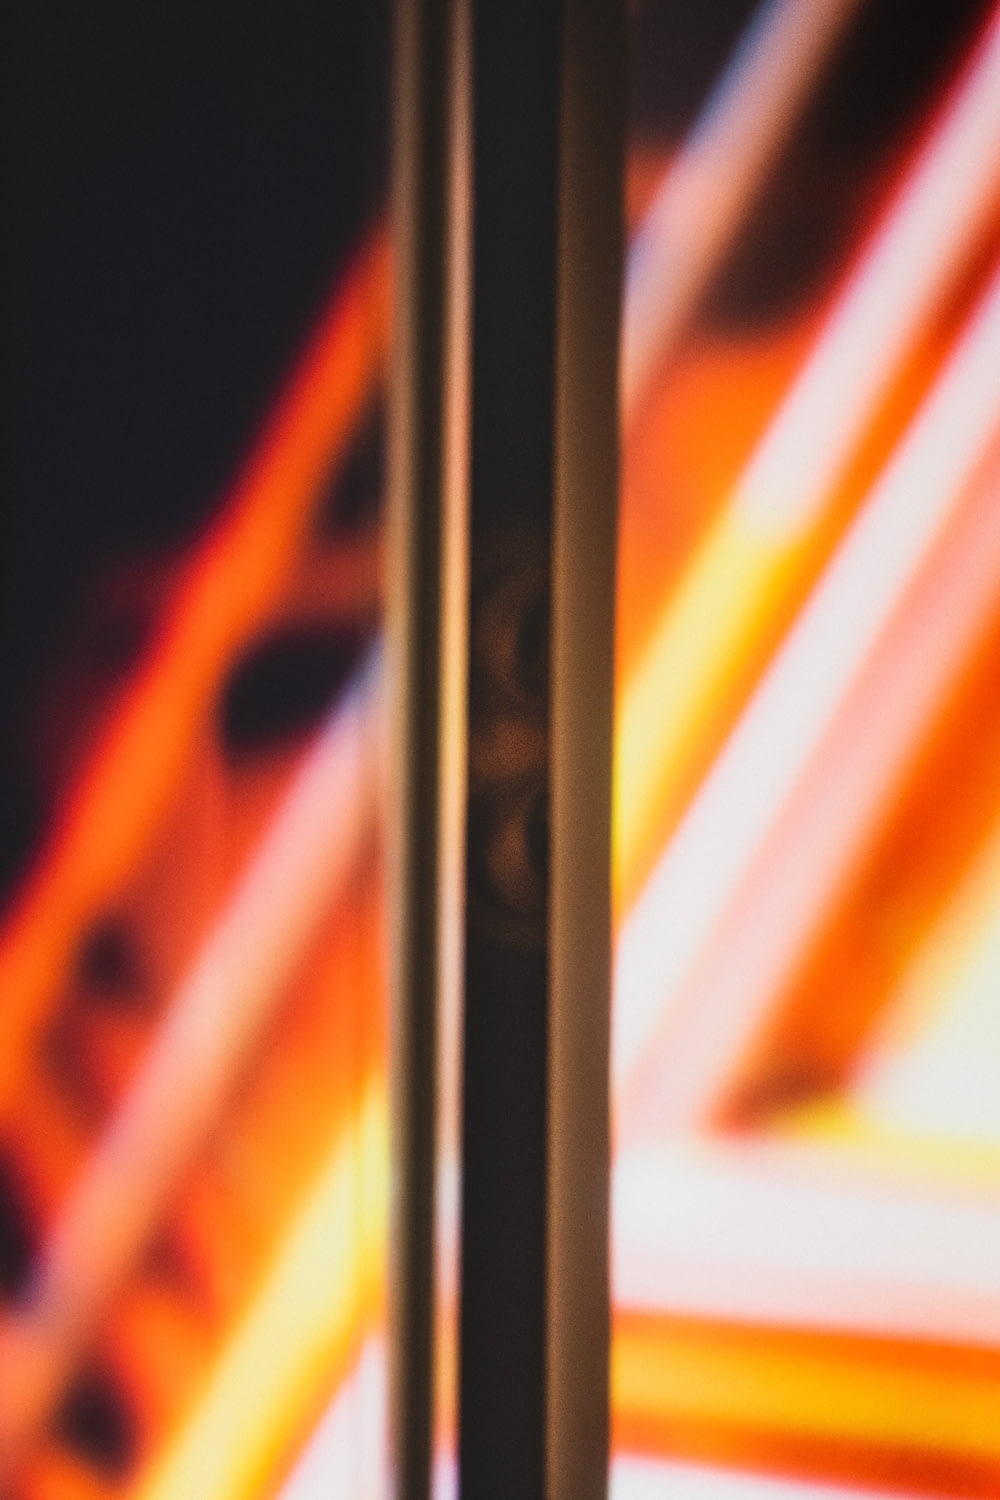 a close up of a pair of skis with a blurry background